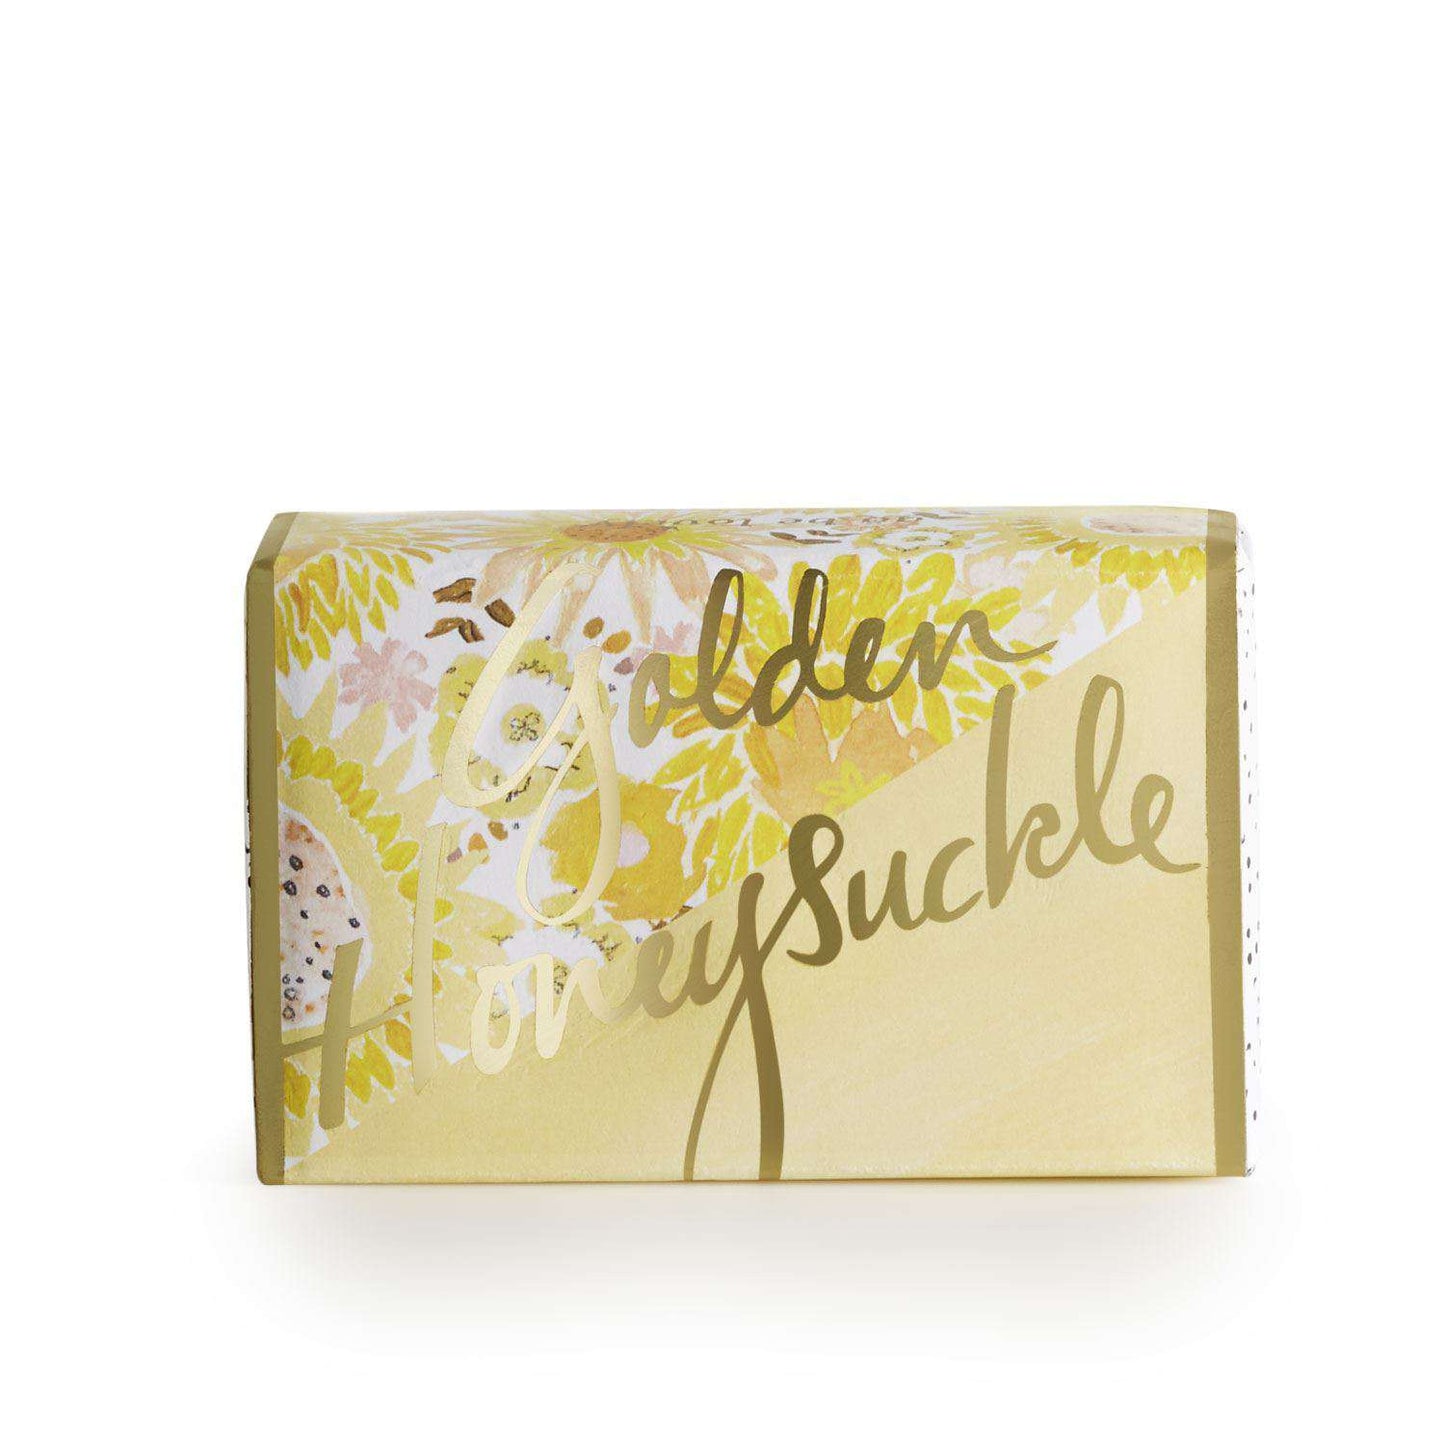 Luminous fragrance notes of nectar-rich honeysuckle, tender neroli blossoms, and cashmere-soft woods.